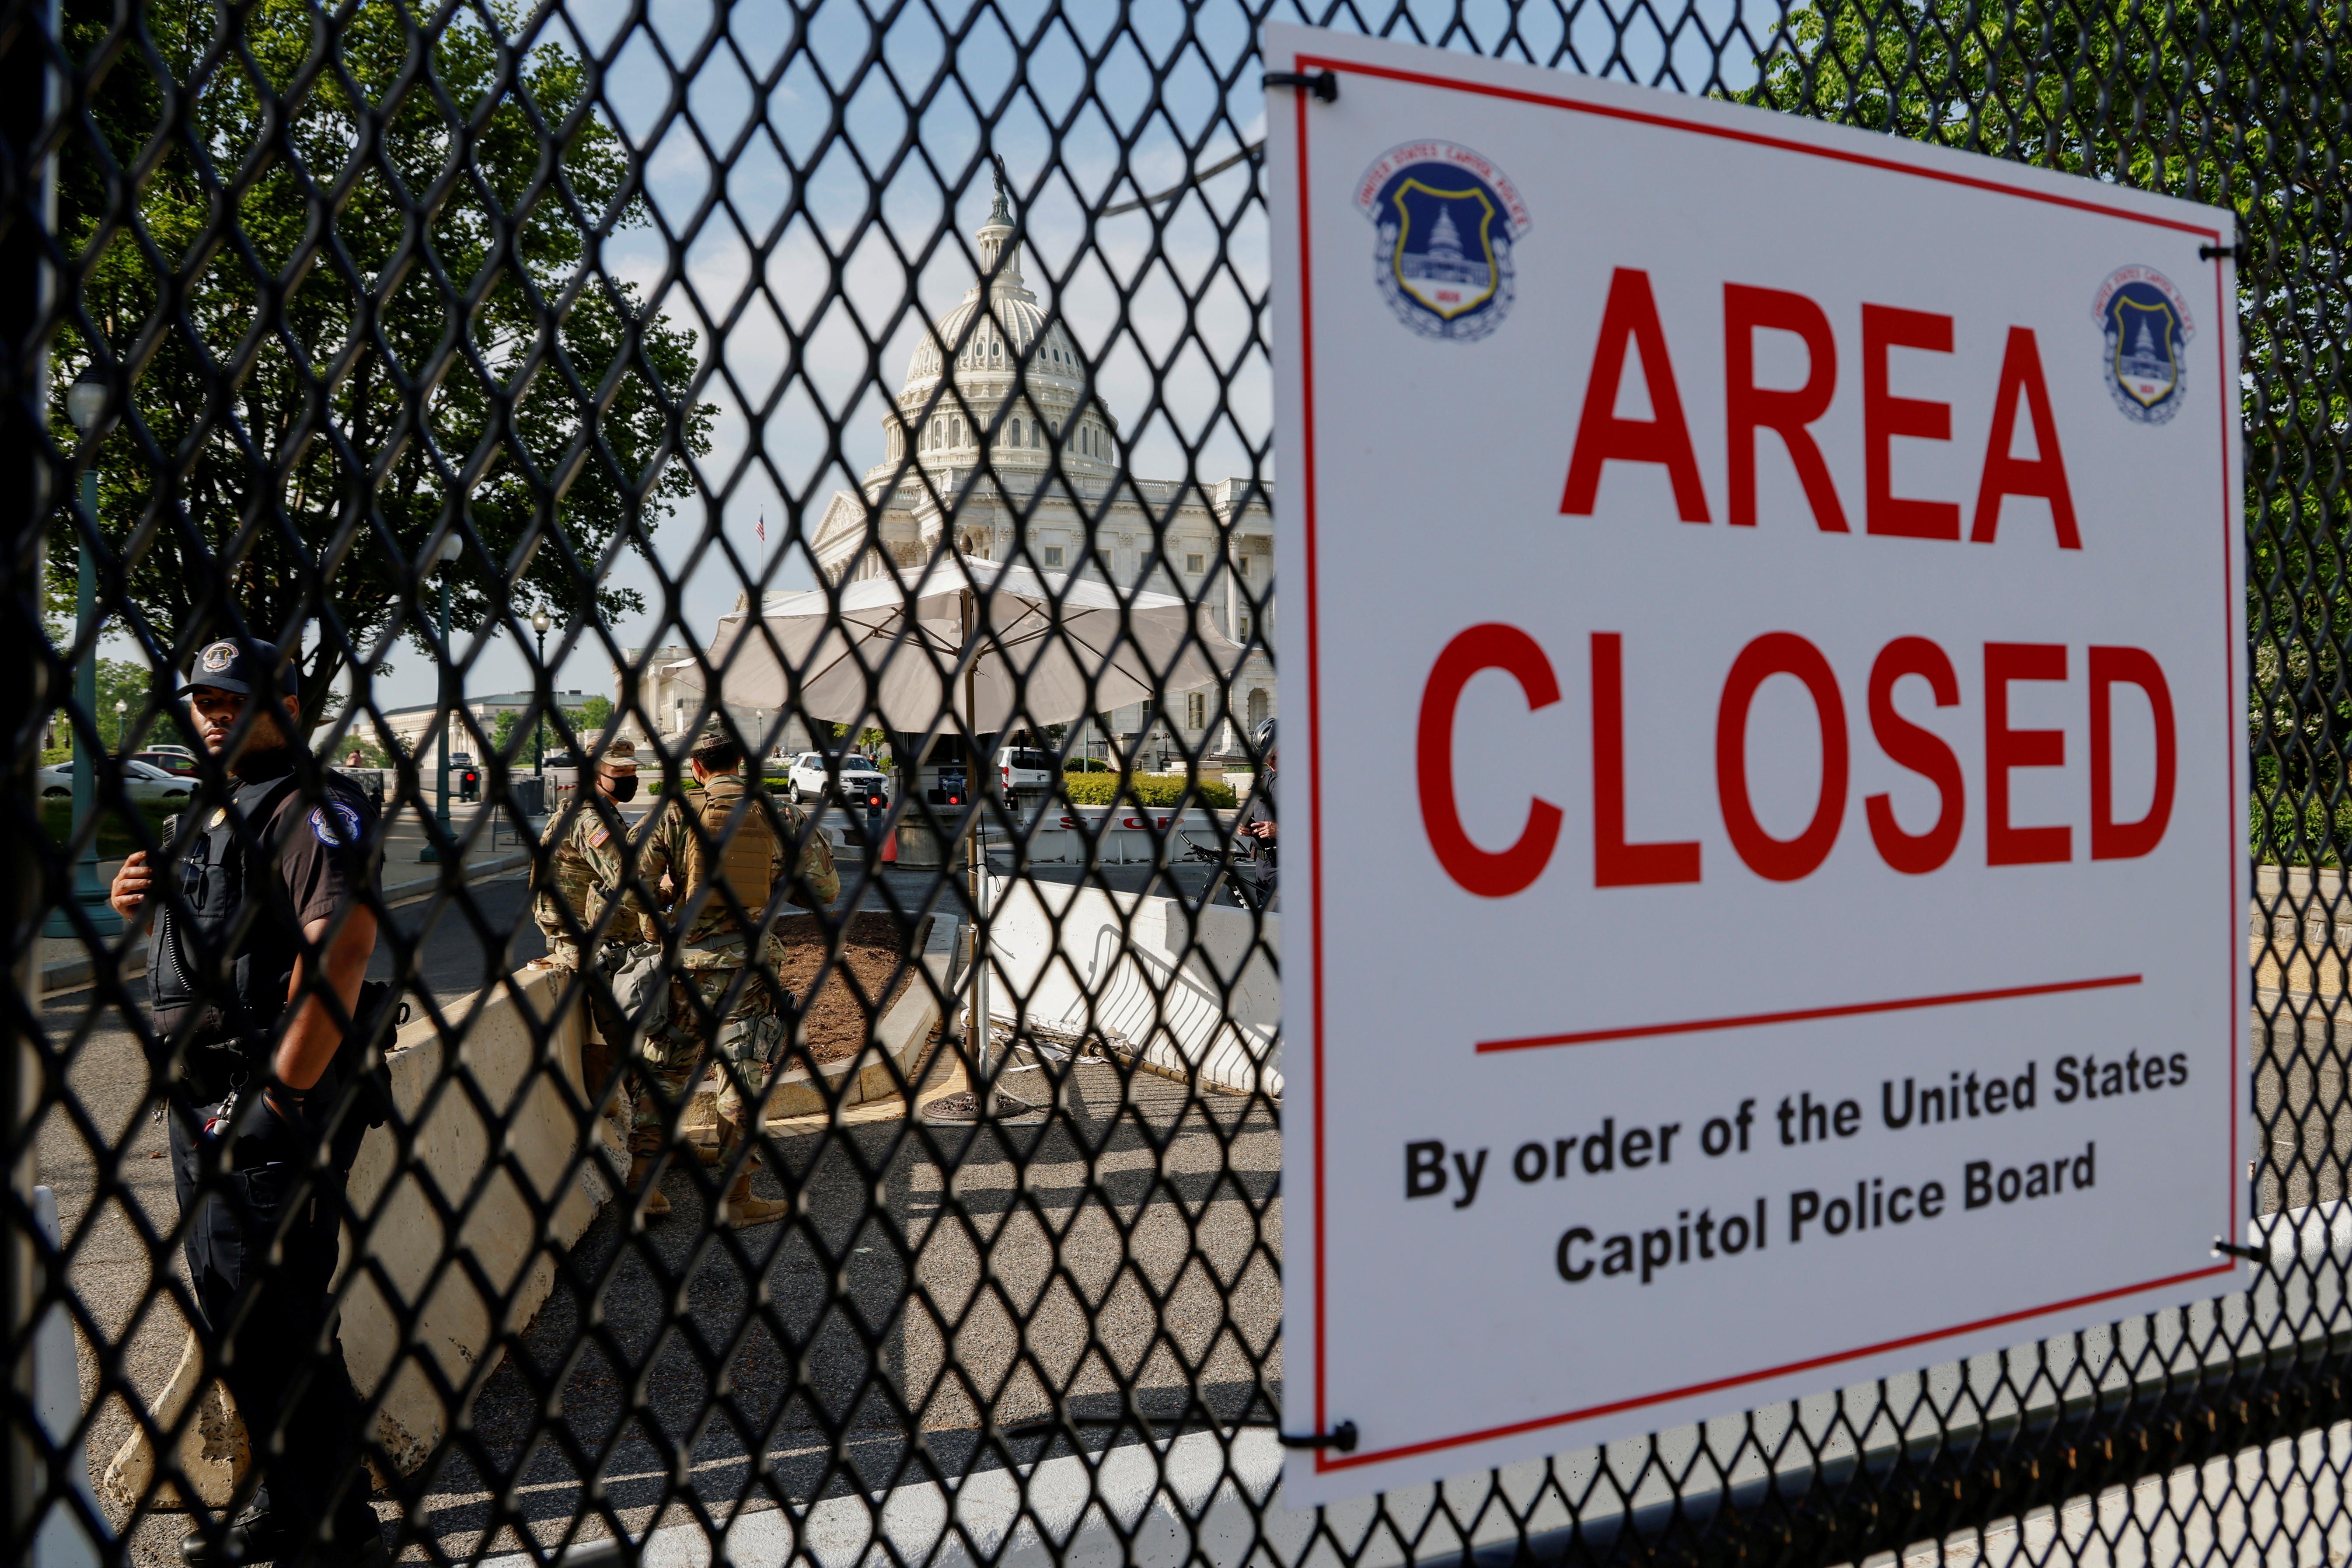 U.S. Capitol Police and National Guard soldiers operate a checkpoint at the U.S. Capitol in Washington